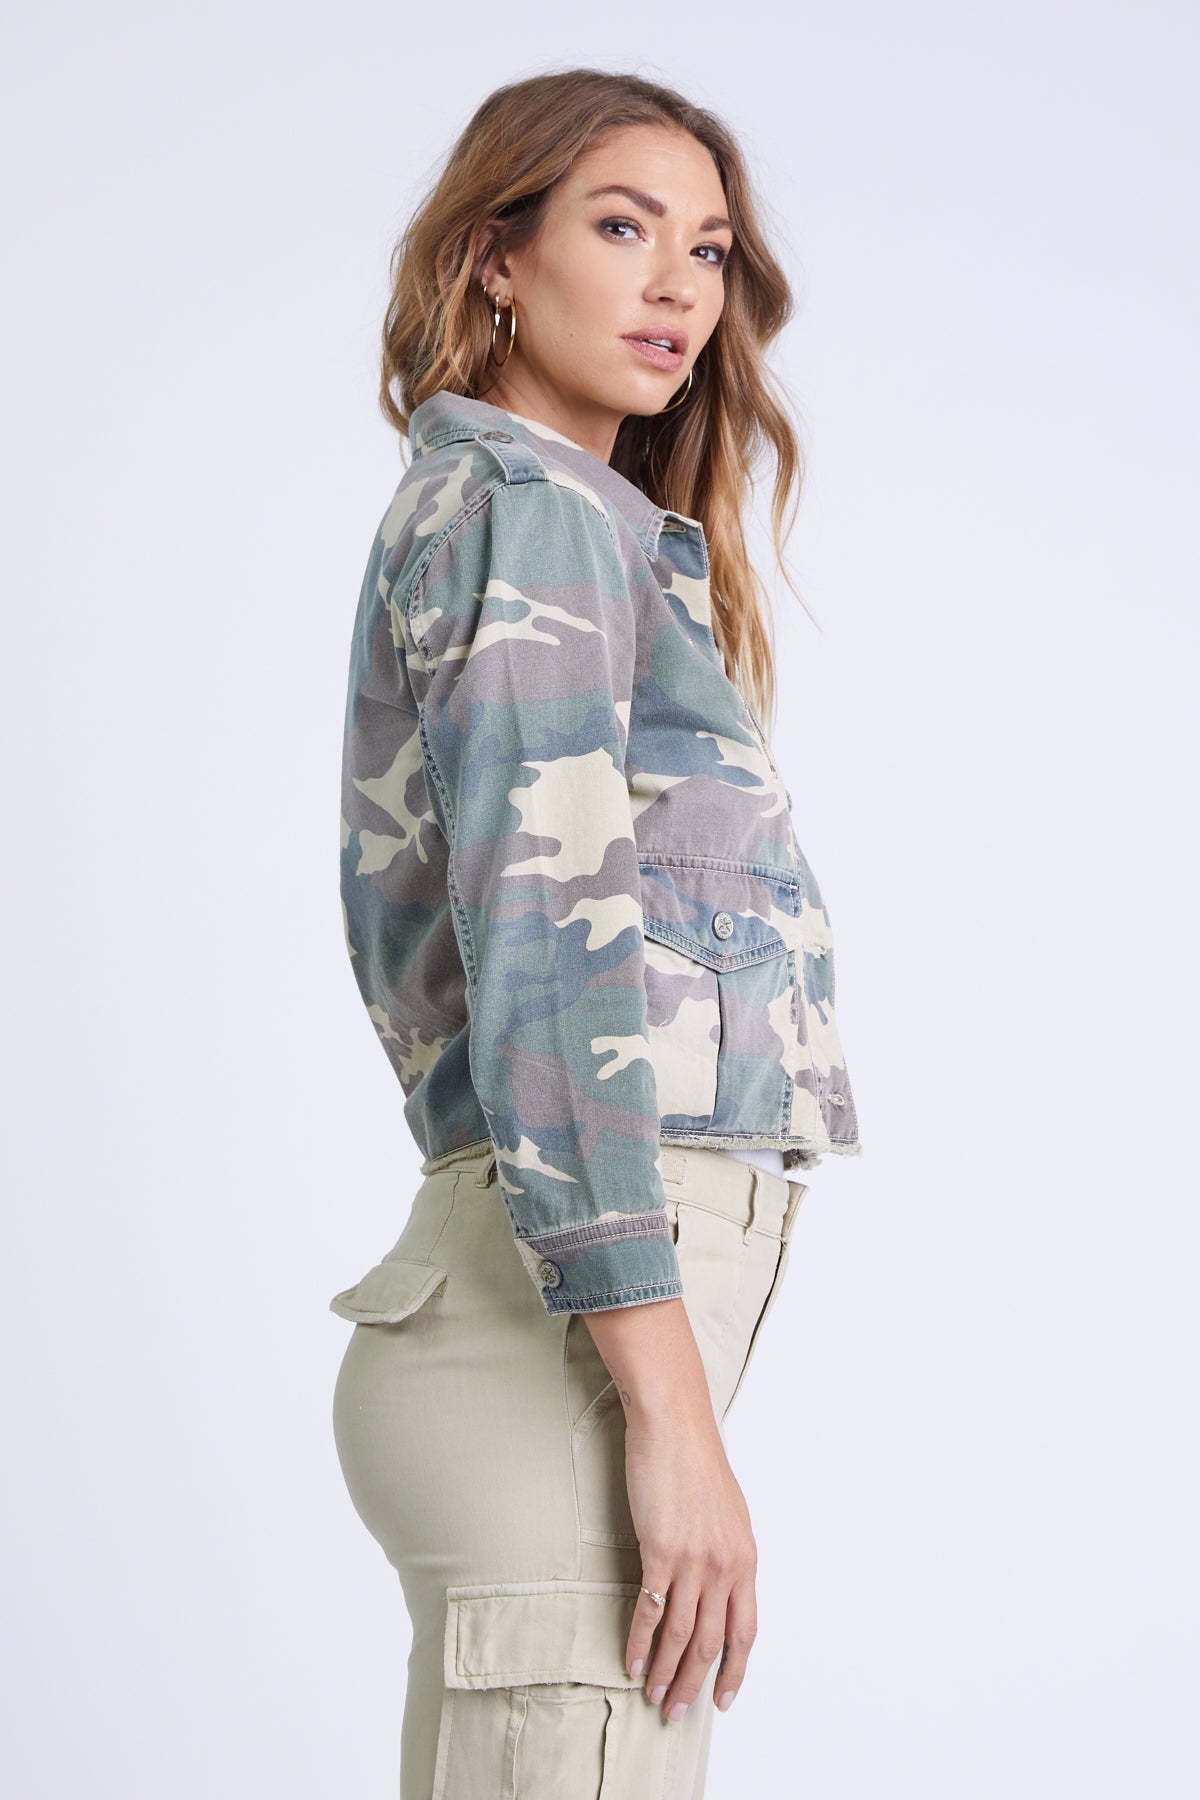 Collared crop jacket in Army Camo